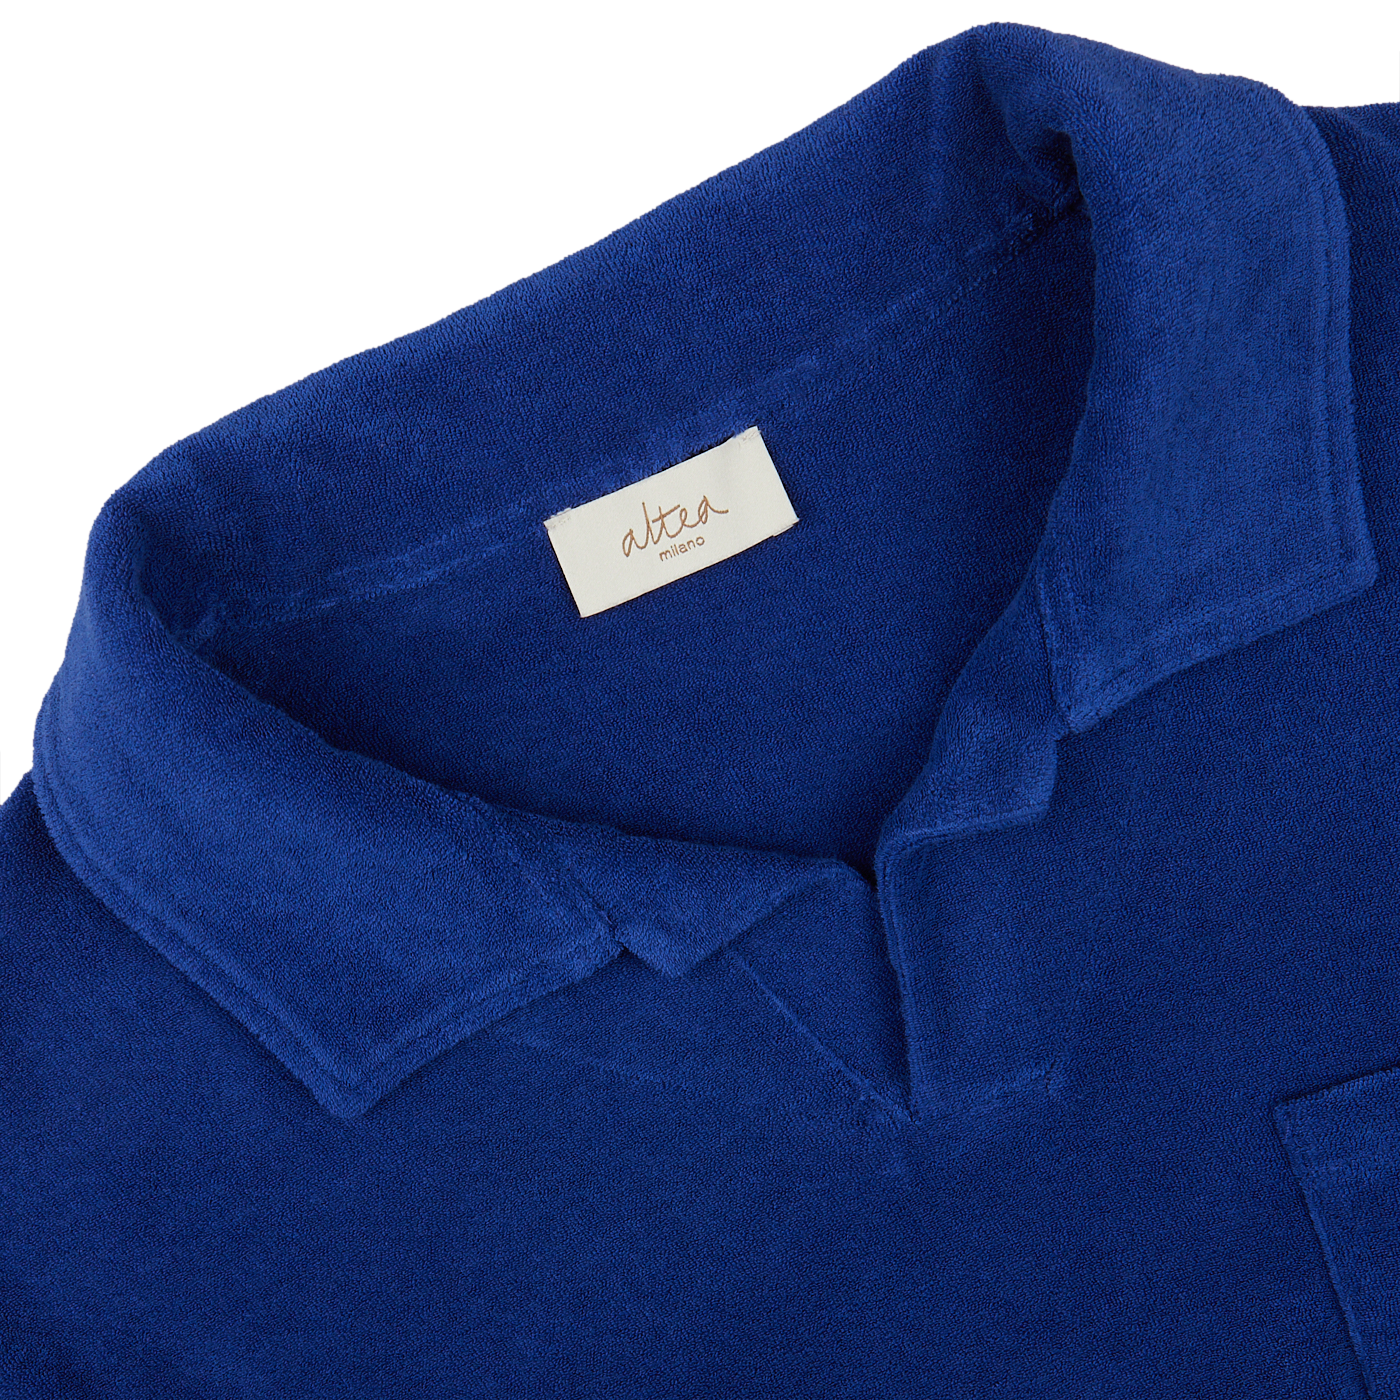 Close-up of a dark blue Altea Cotton Towelling Capri Collar Polo Shirt with a visible brand label on the collar.